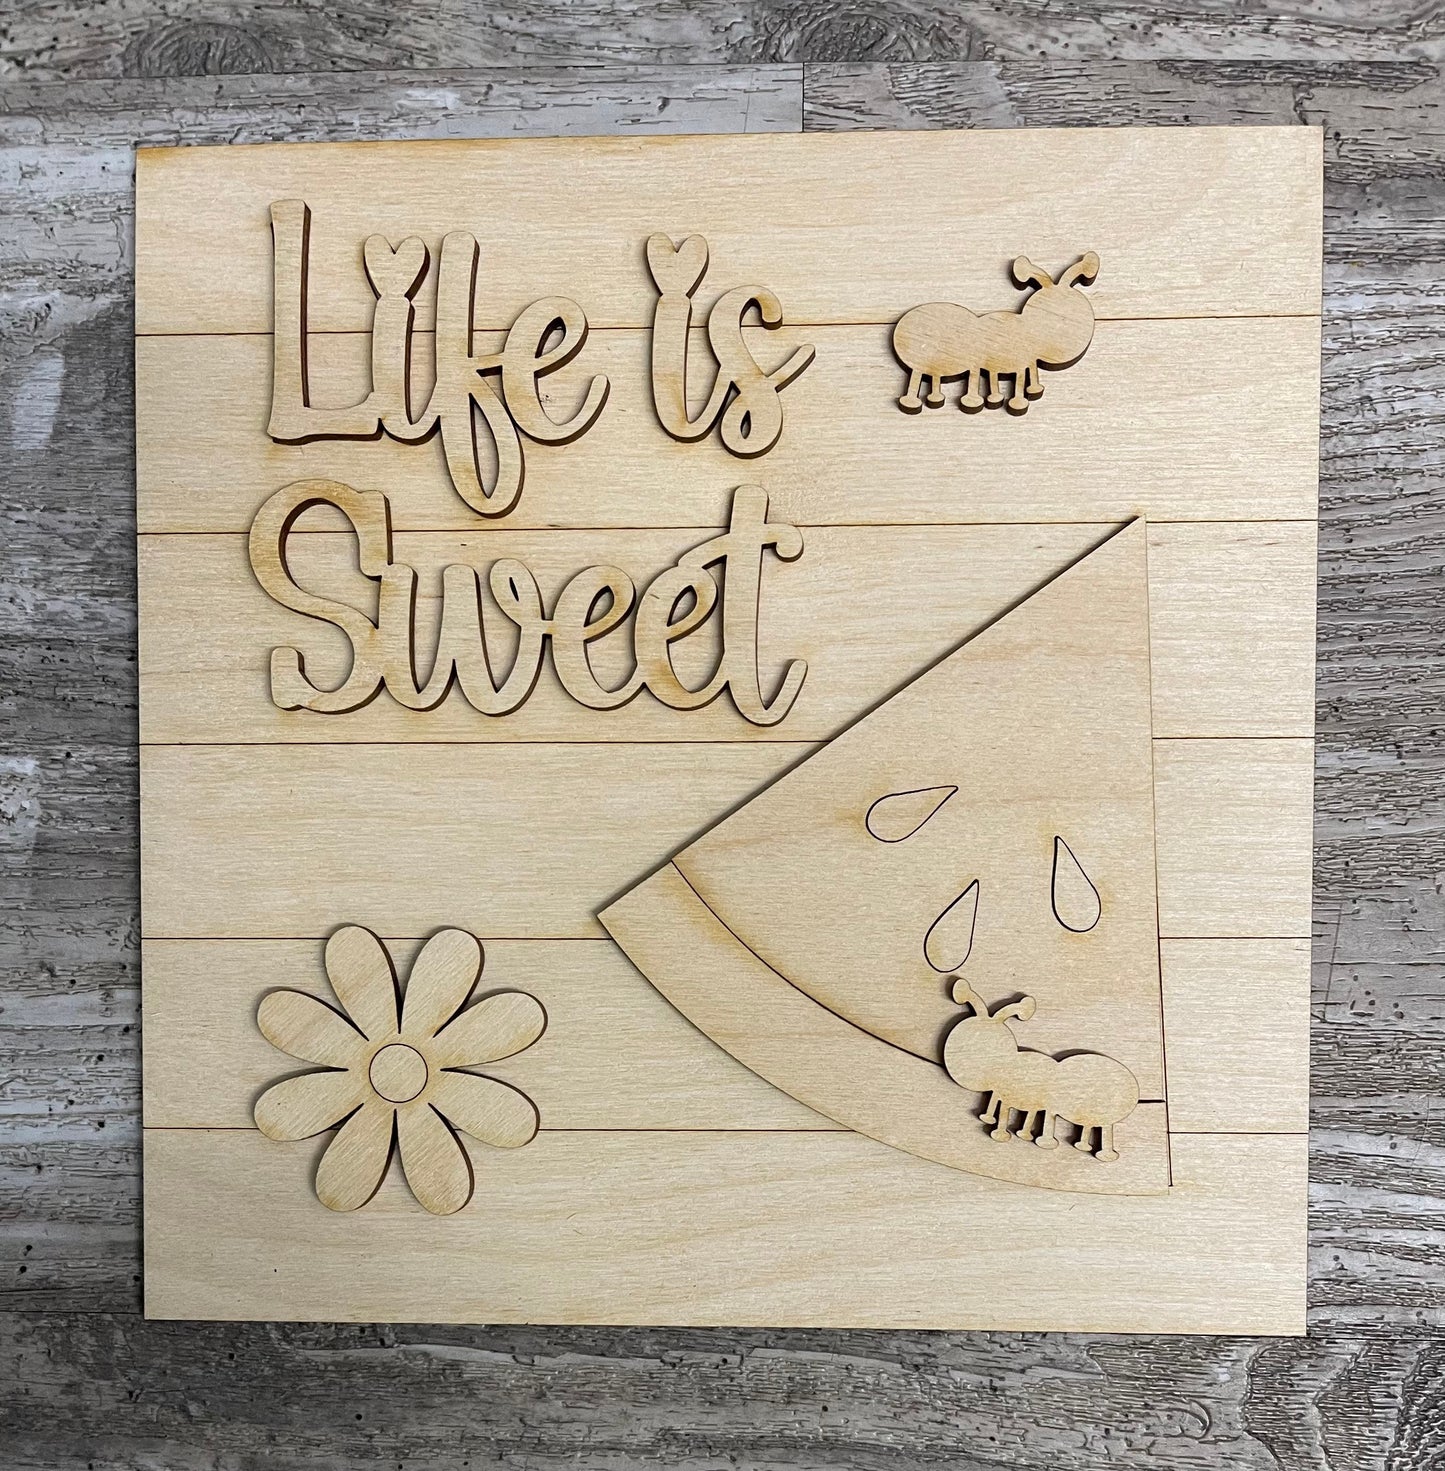 Unpainted Changeable insert only Everyday Life is Sweet piece ready for you to paint, no frame